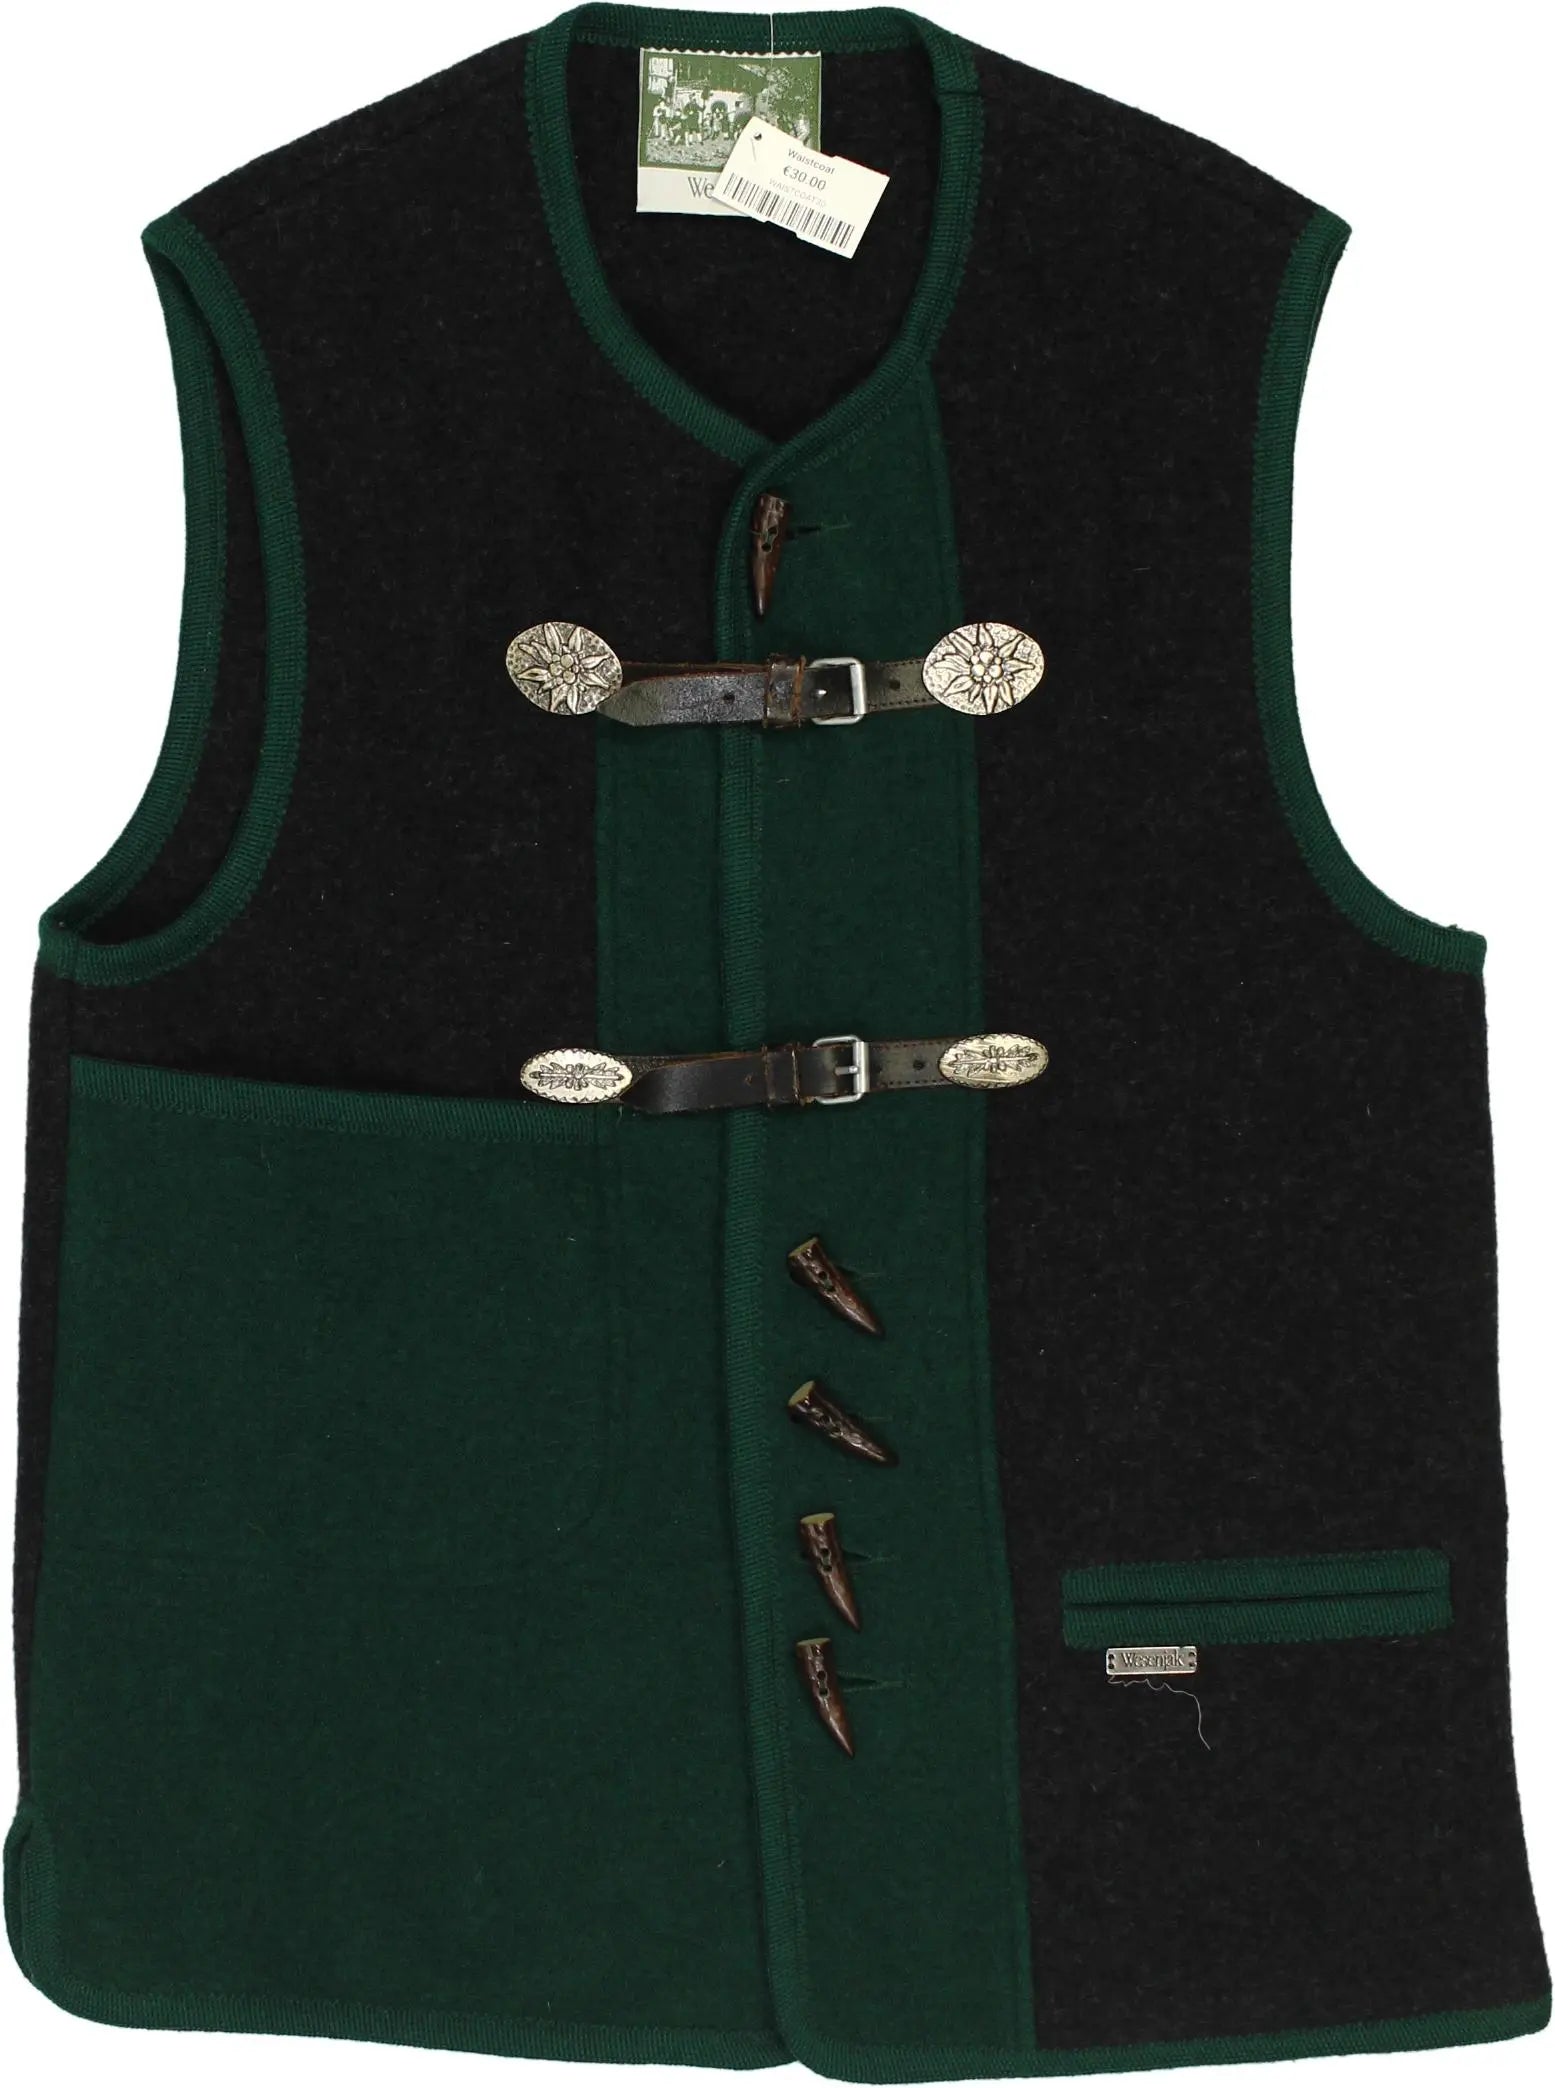 Wesenjak - Bavarian Wool Waistcoat- ThriftTale.com - Vintage and second handclothing